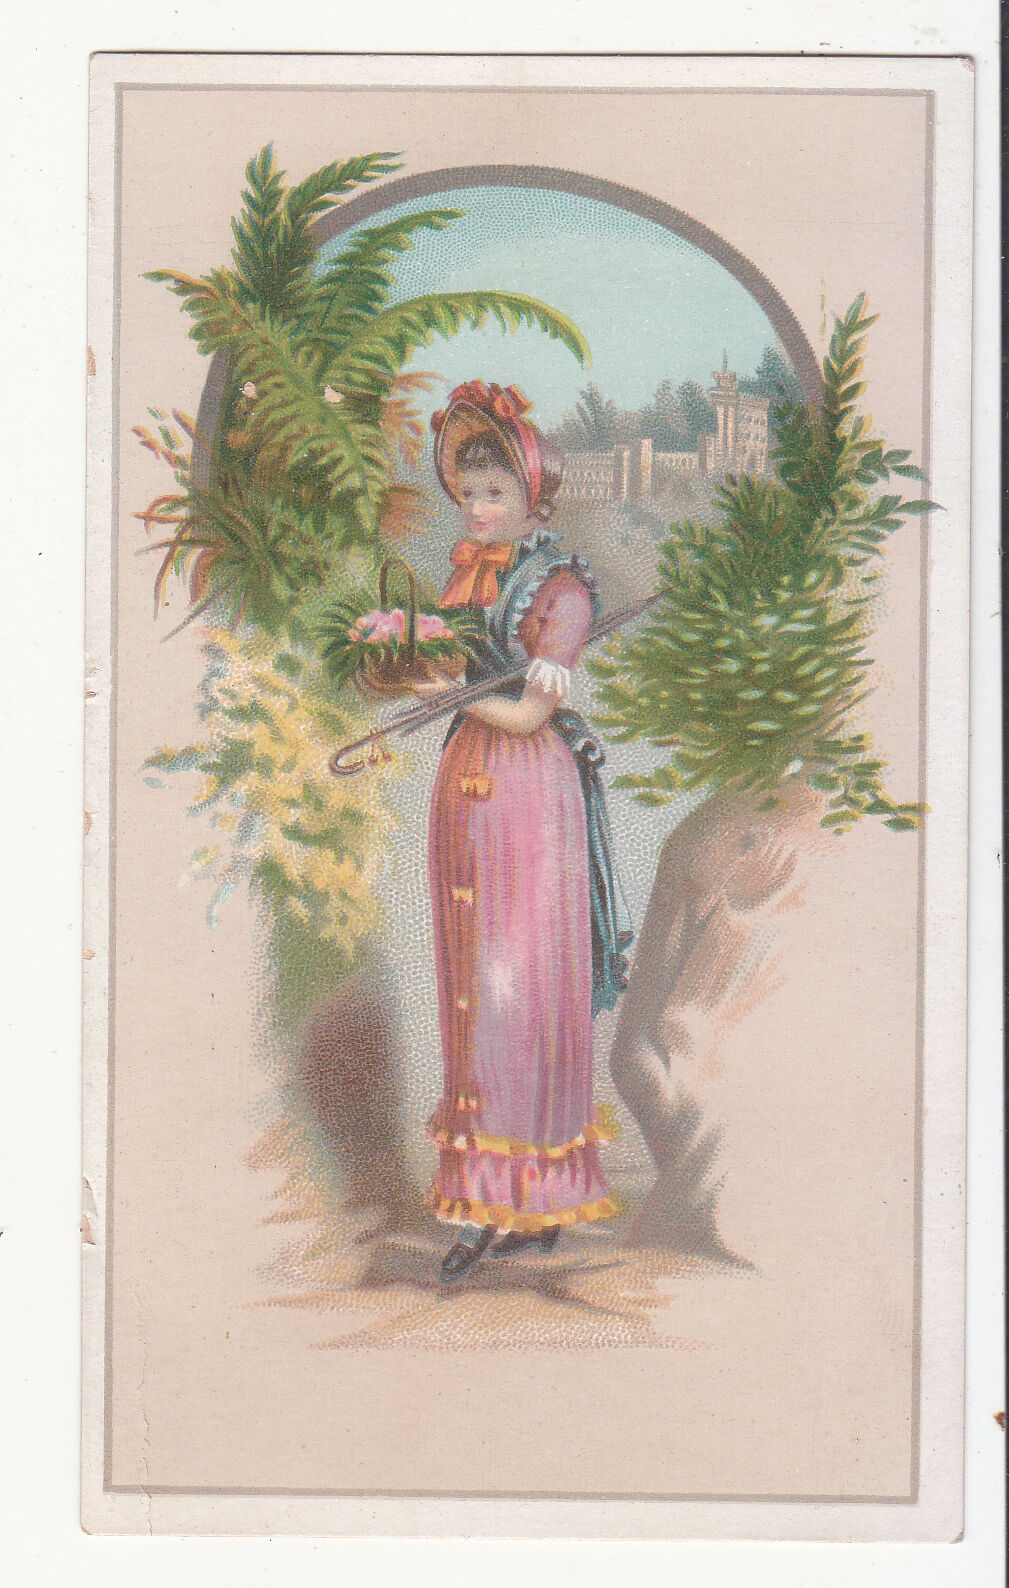 Woman in Pink Dress on Lane Cane No Advertising Victorian Card c 1880s